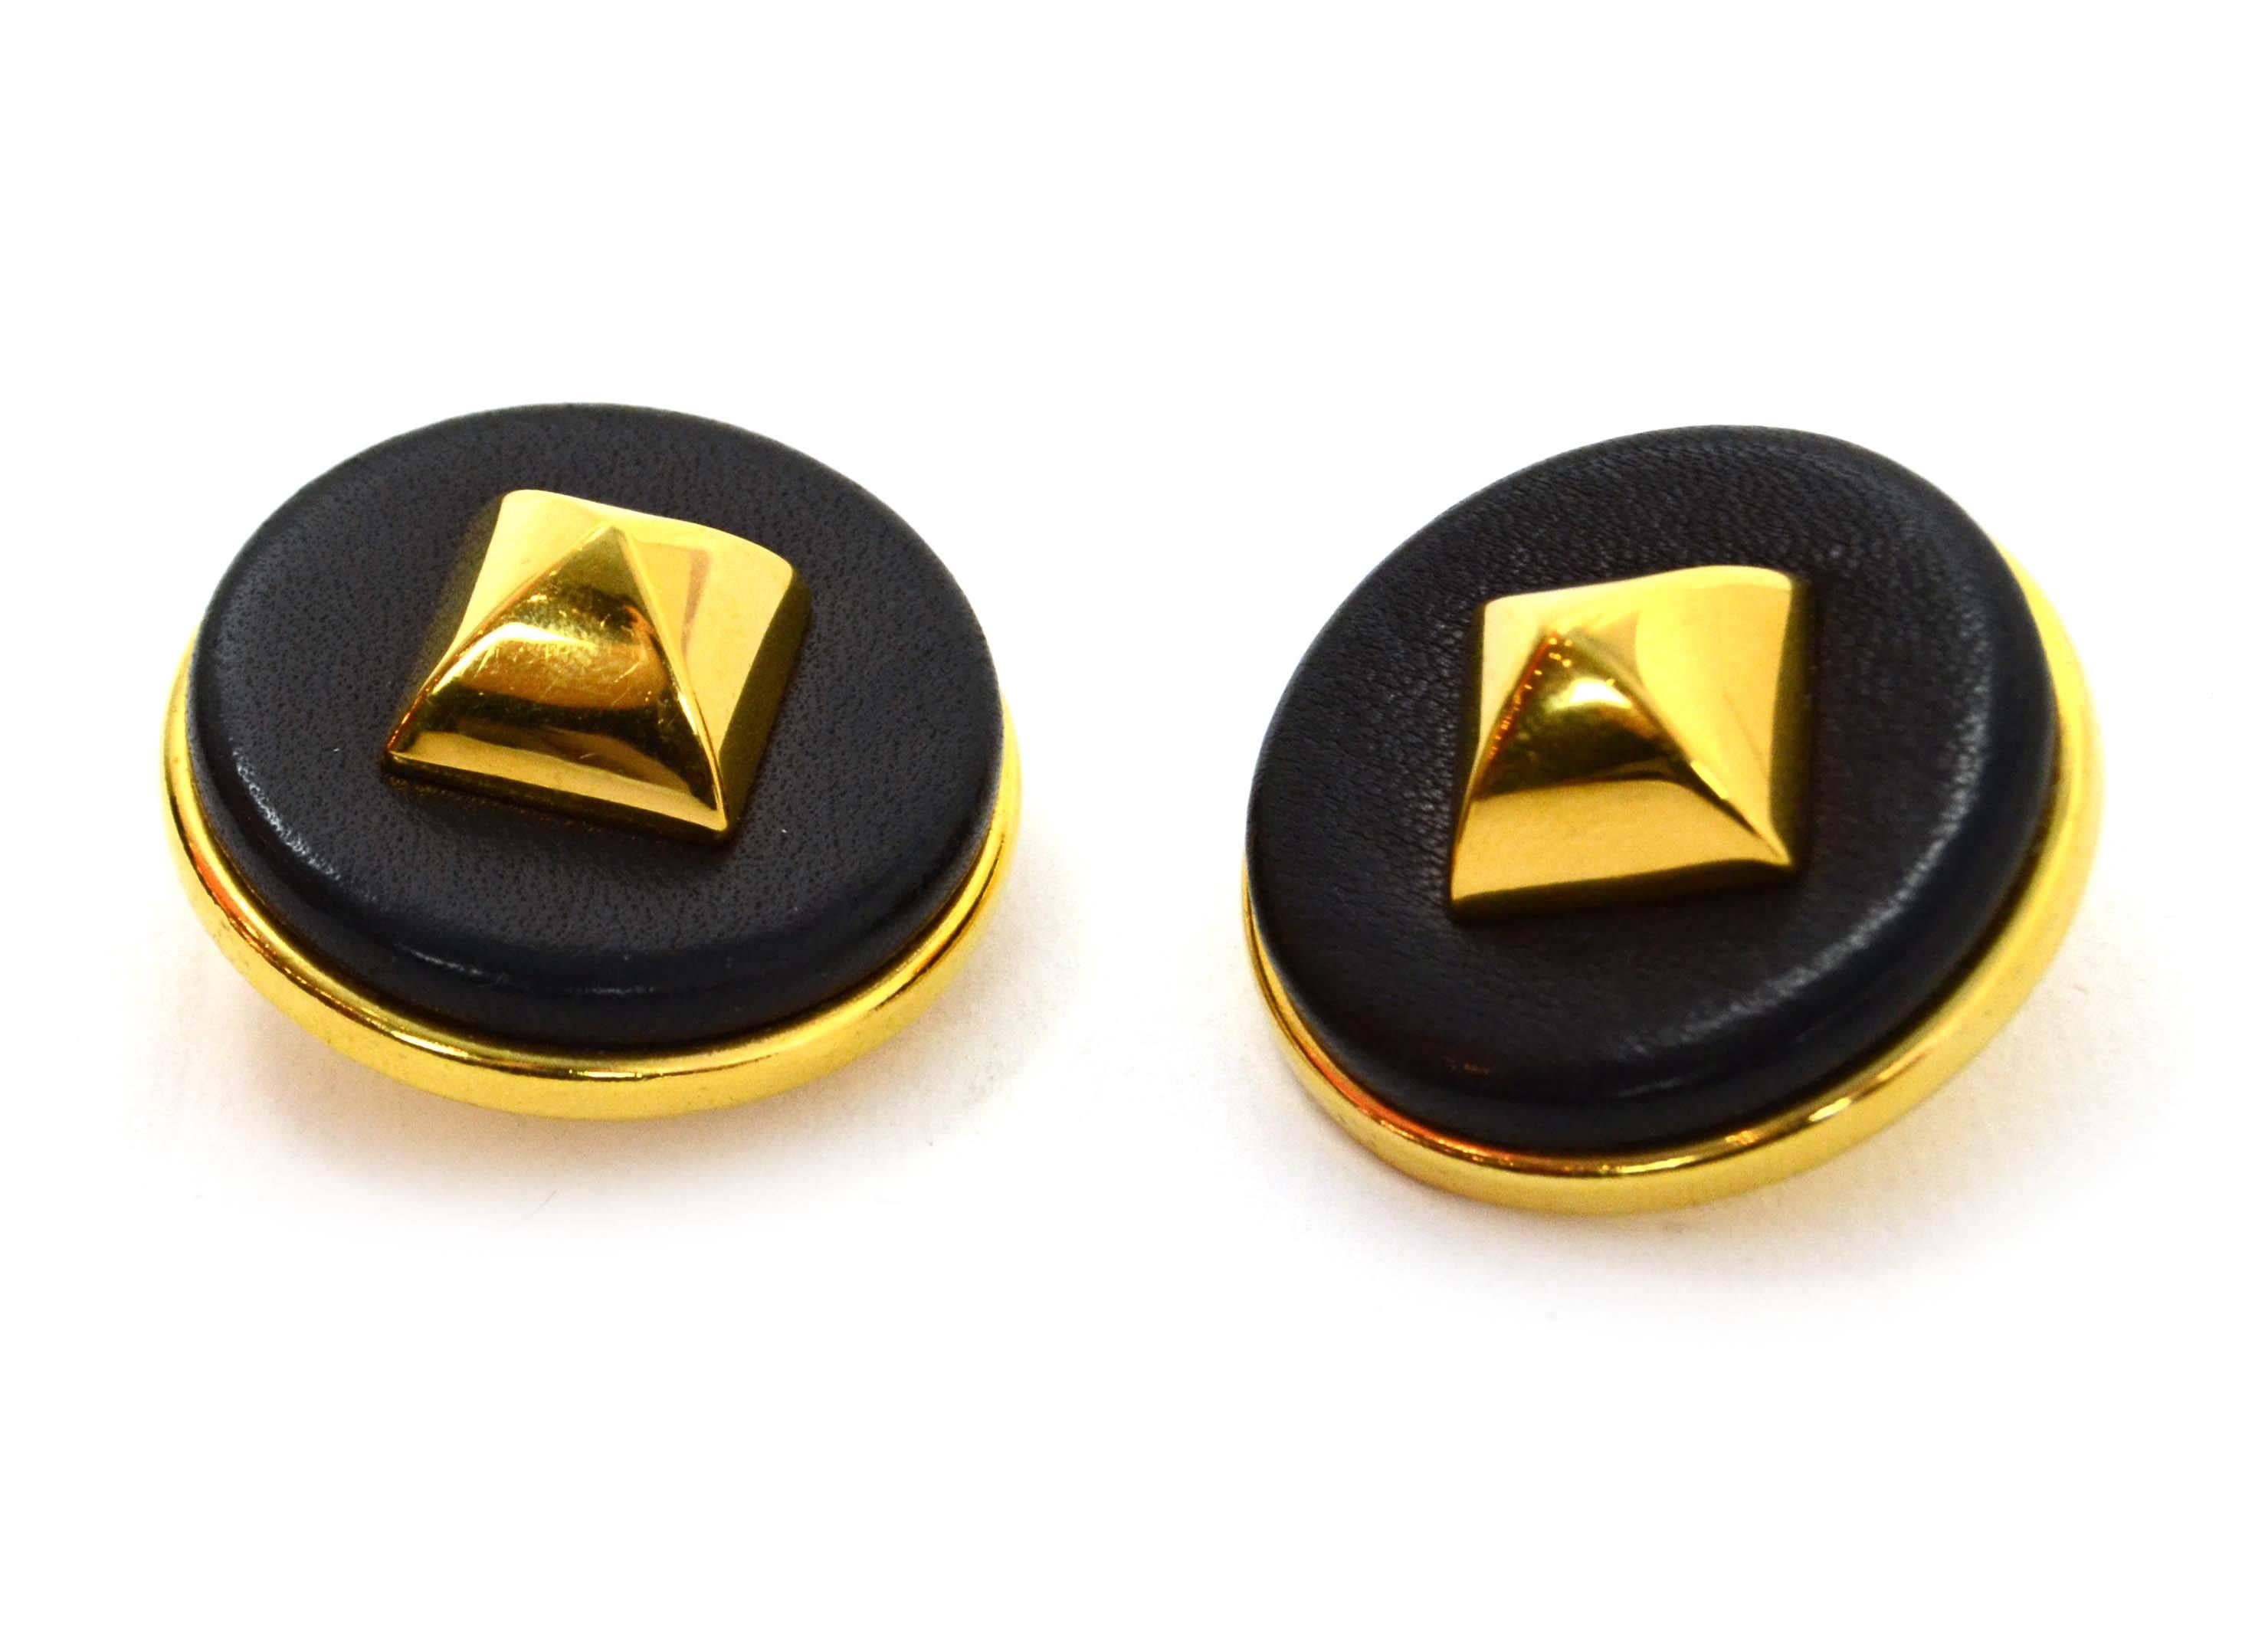 Hermes Black Leather & Gold Medor Clip On Earrings 
Color: Gold and black
Materials: Metal and leather
Closure: Clip on
Stamp: Hermes Paris
Overall Condition: Excellent pre-owned condition
Measurements: 
Diameter: 1.5"